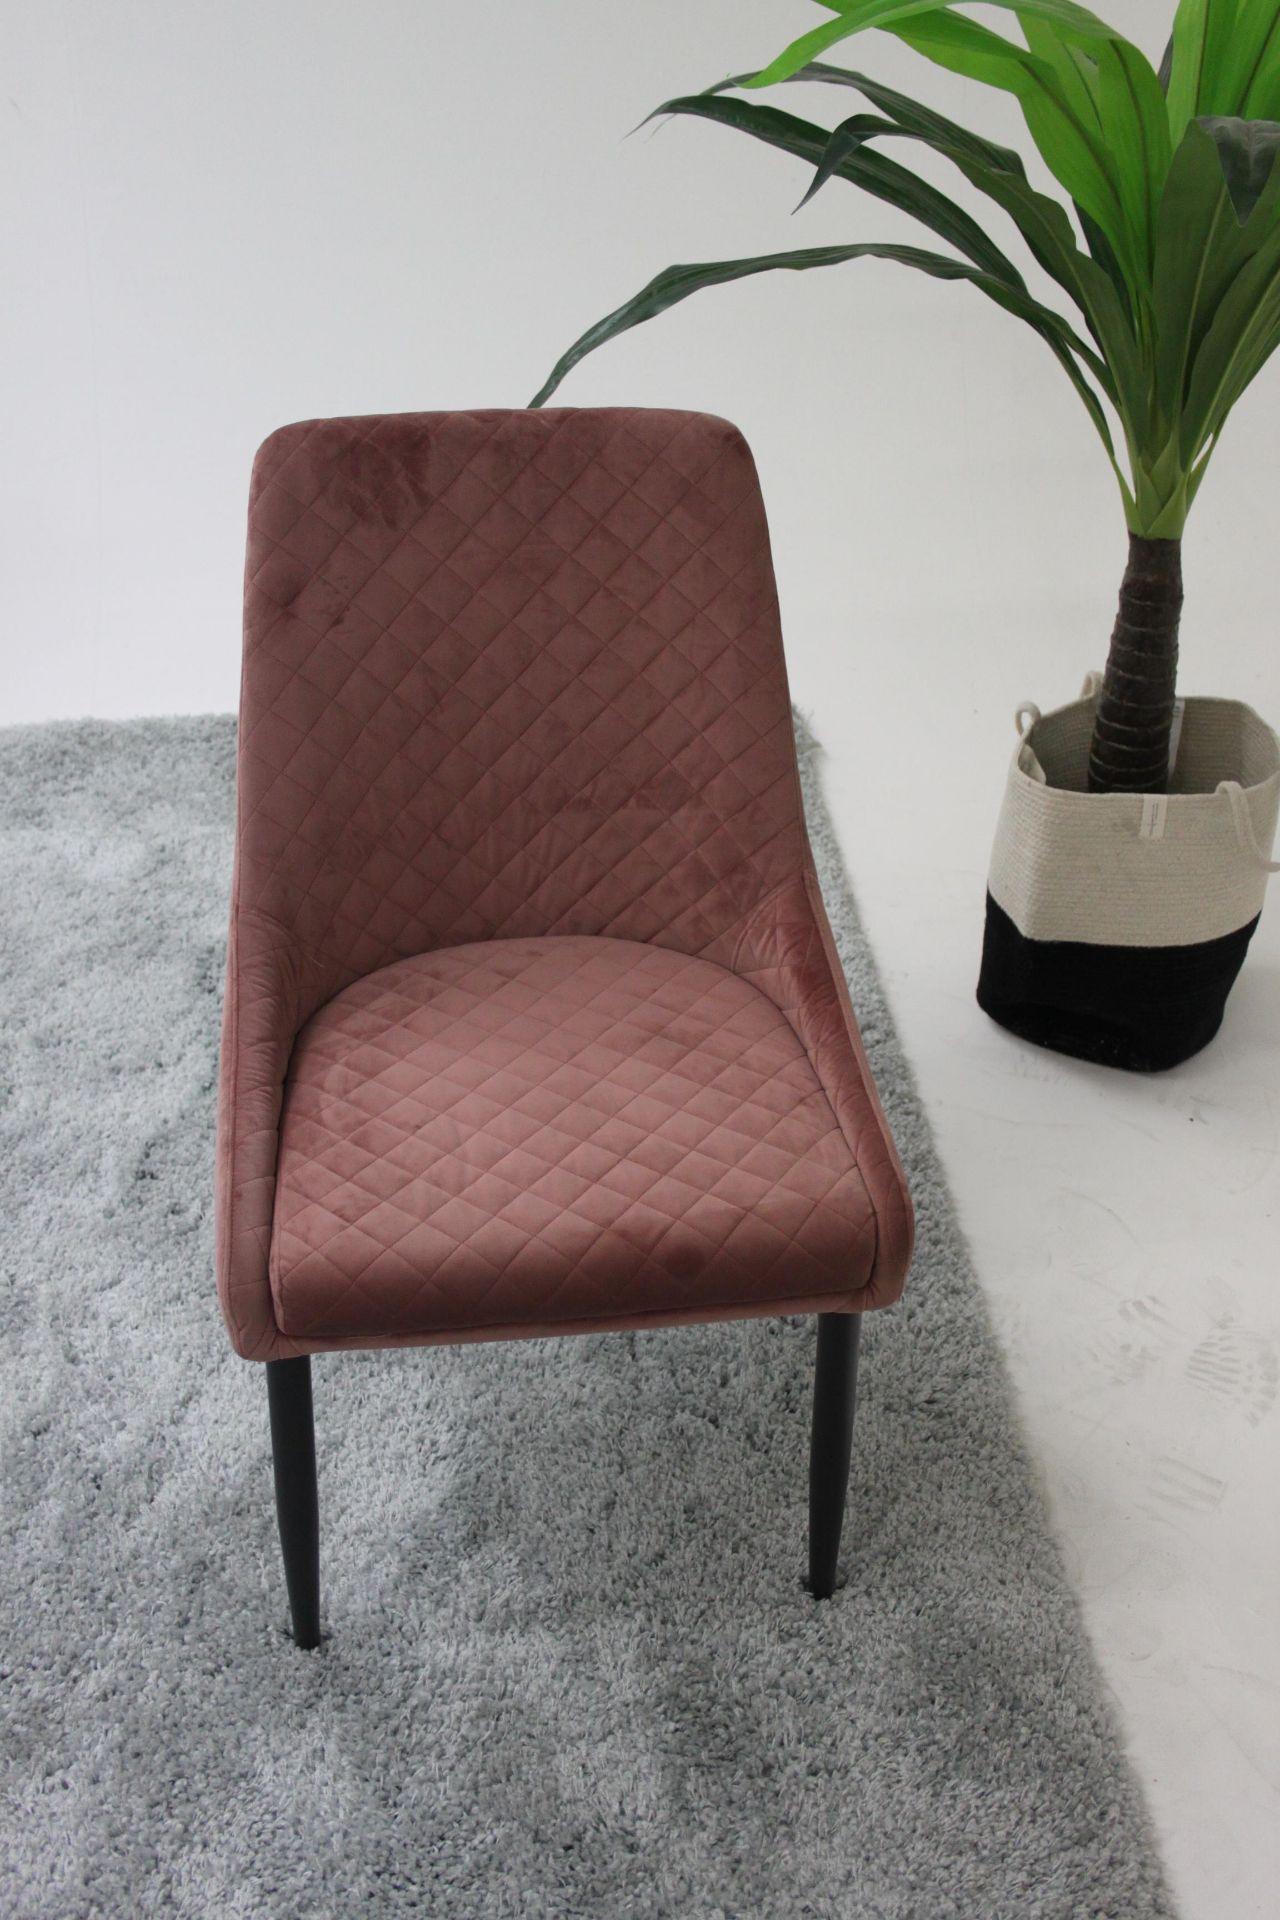 Aston Dining Chair Pink Quilted Dining Chair Is A Perfect Combination Of Functionality Durability - Image 2 of 3